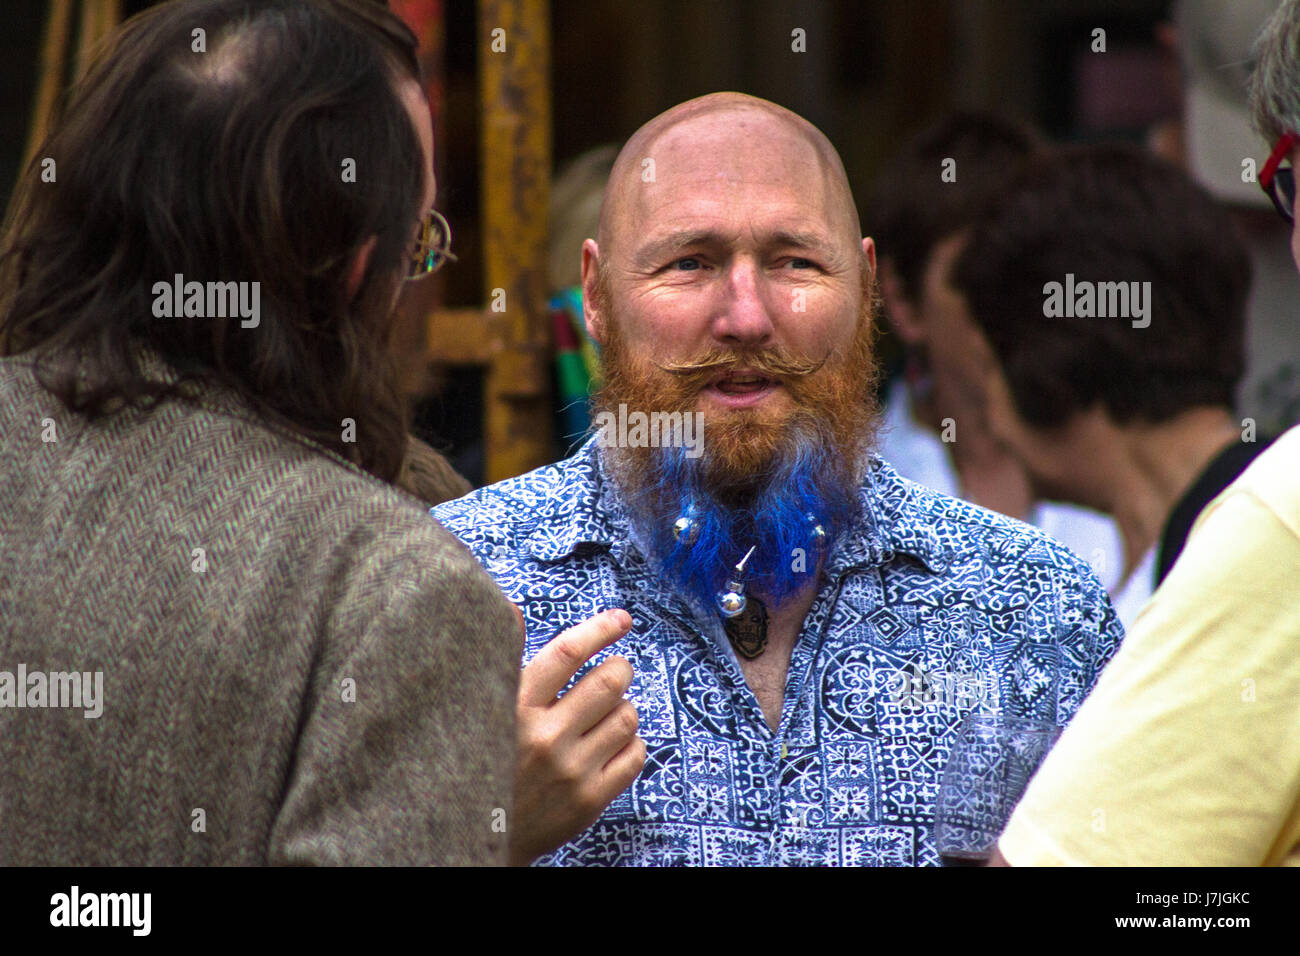 Bald, blue bearded man mid discussion at a festival in Castle Carrock, Cumbria, UK. Stock Photo